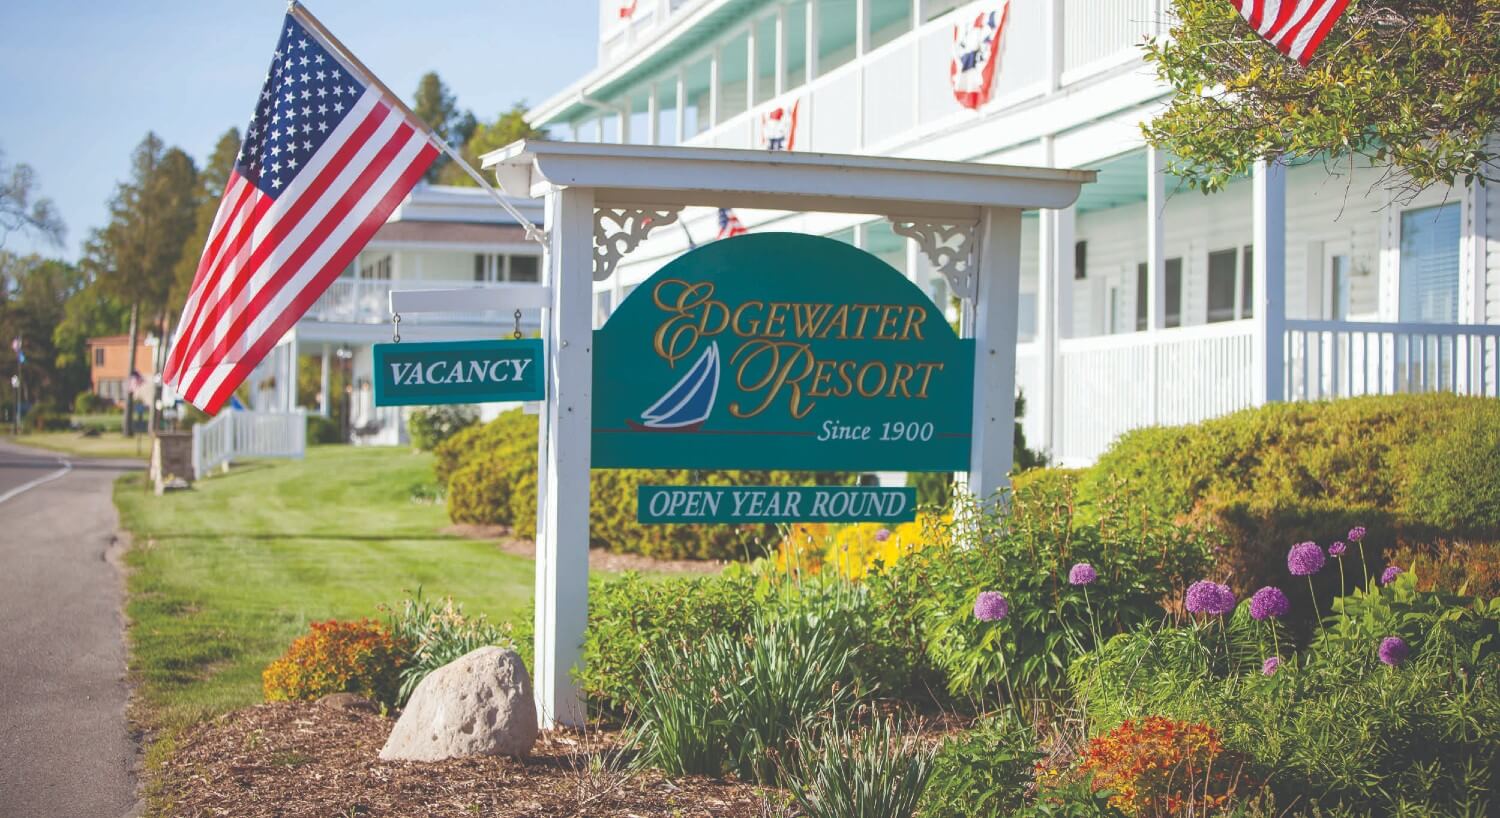 Large green and white business sign with gold text and a blue sailboat with an American flag on a small pole next to white hotel building